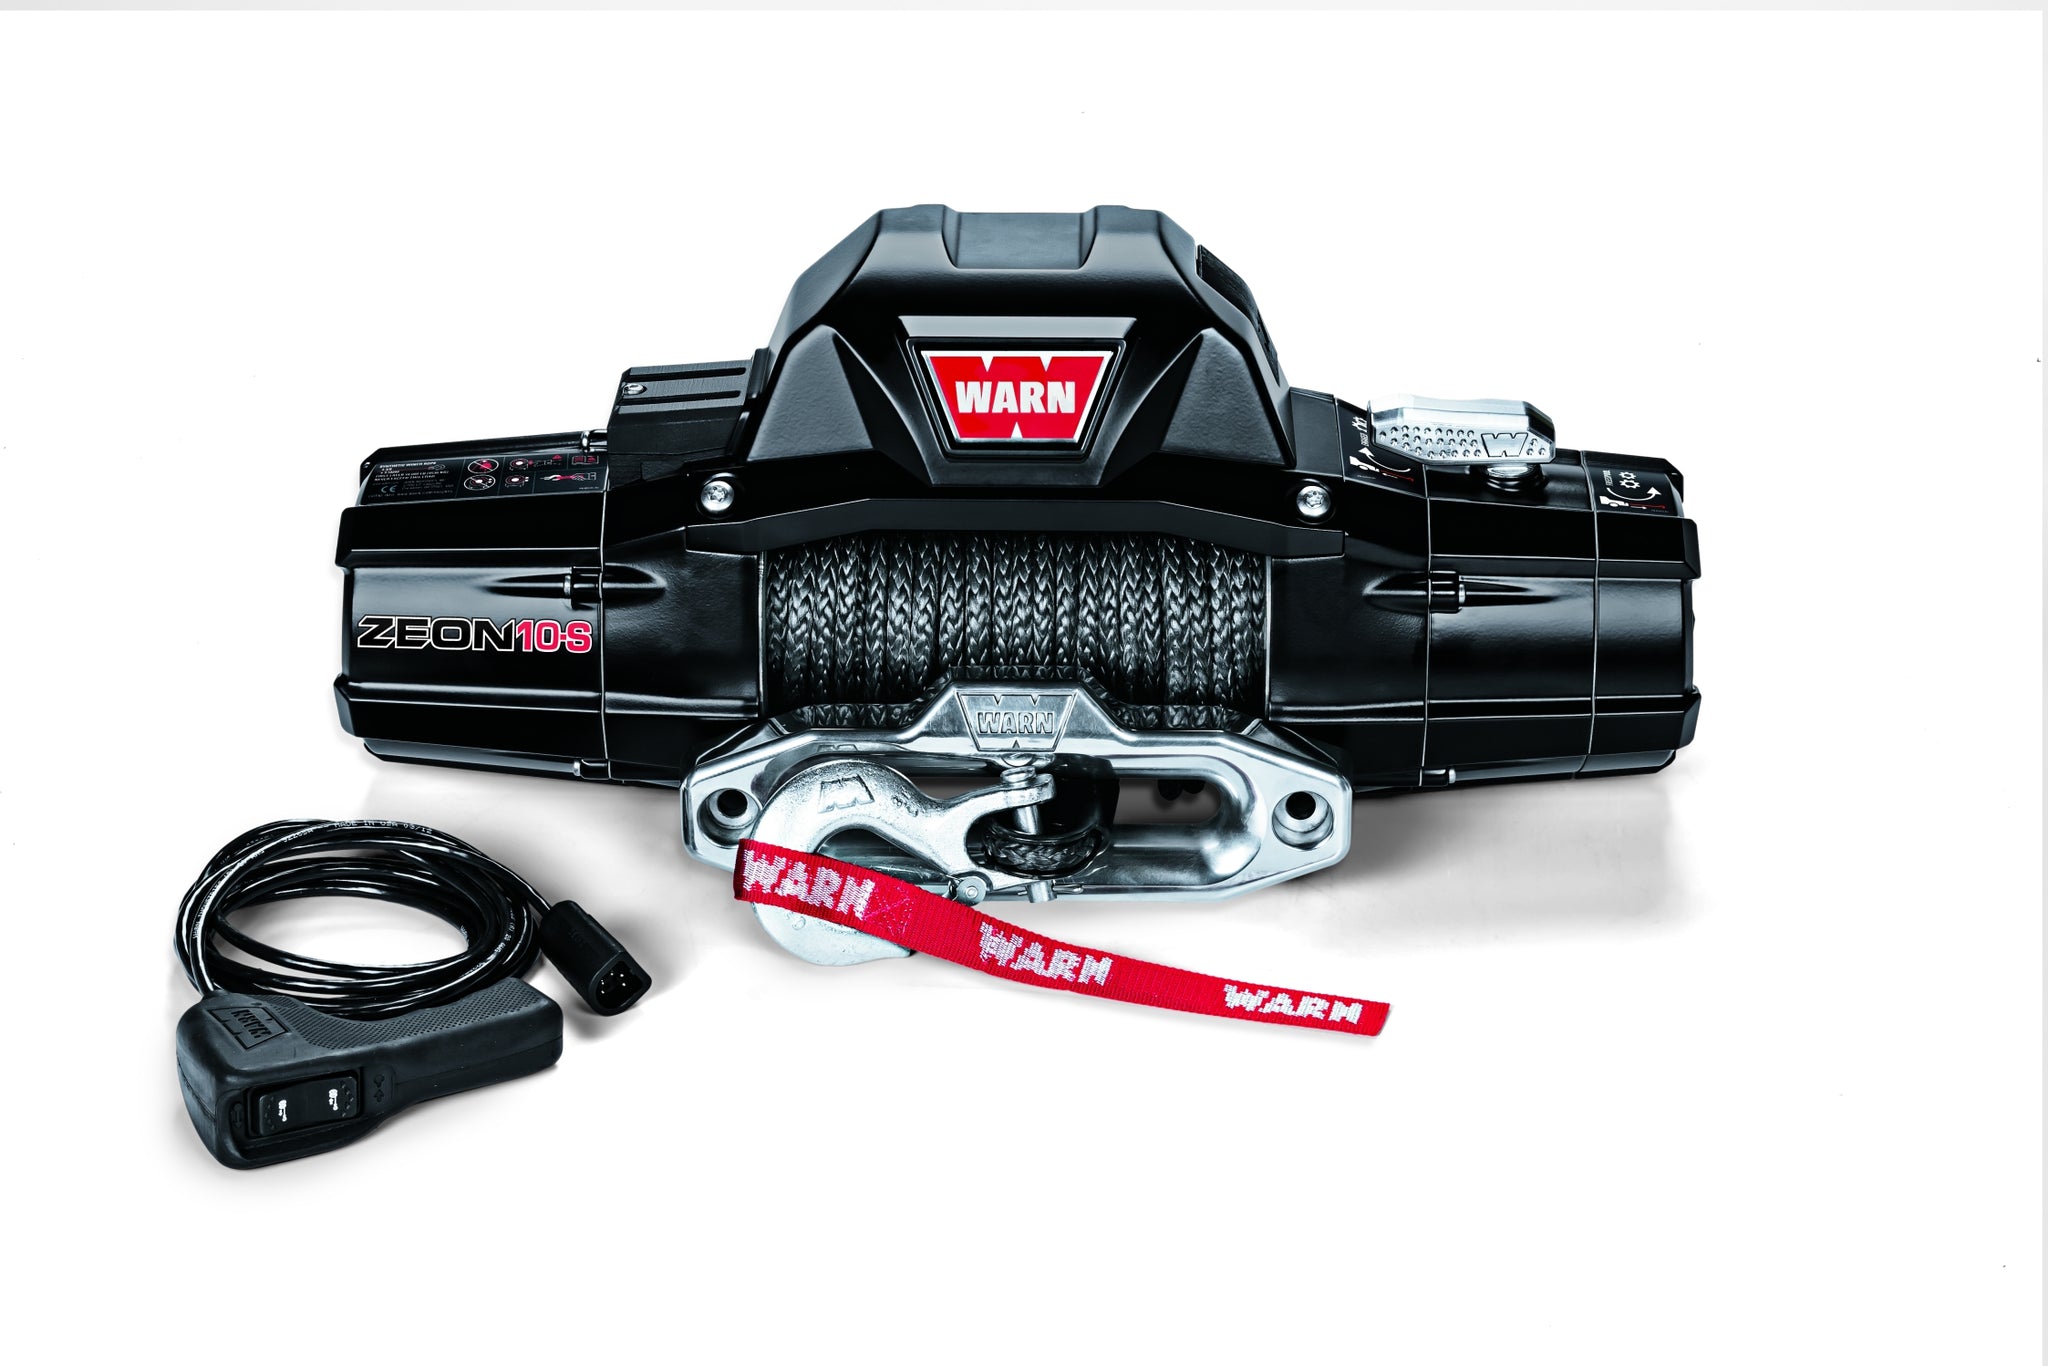 WARN 89611 ZEON ® 12-S PLATINUM VEHICLE MOUNTED RECOVERY WINCH